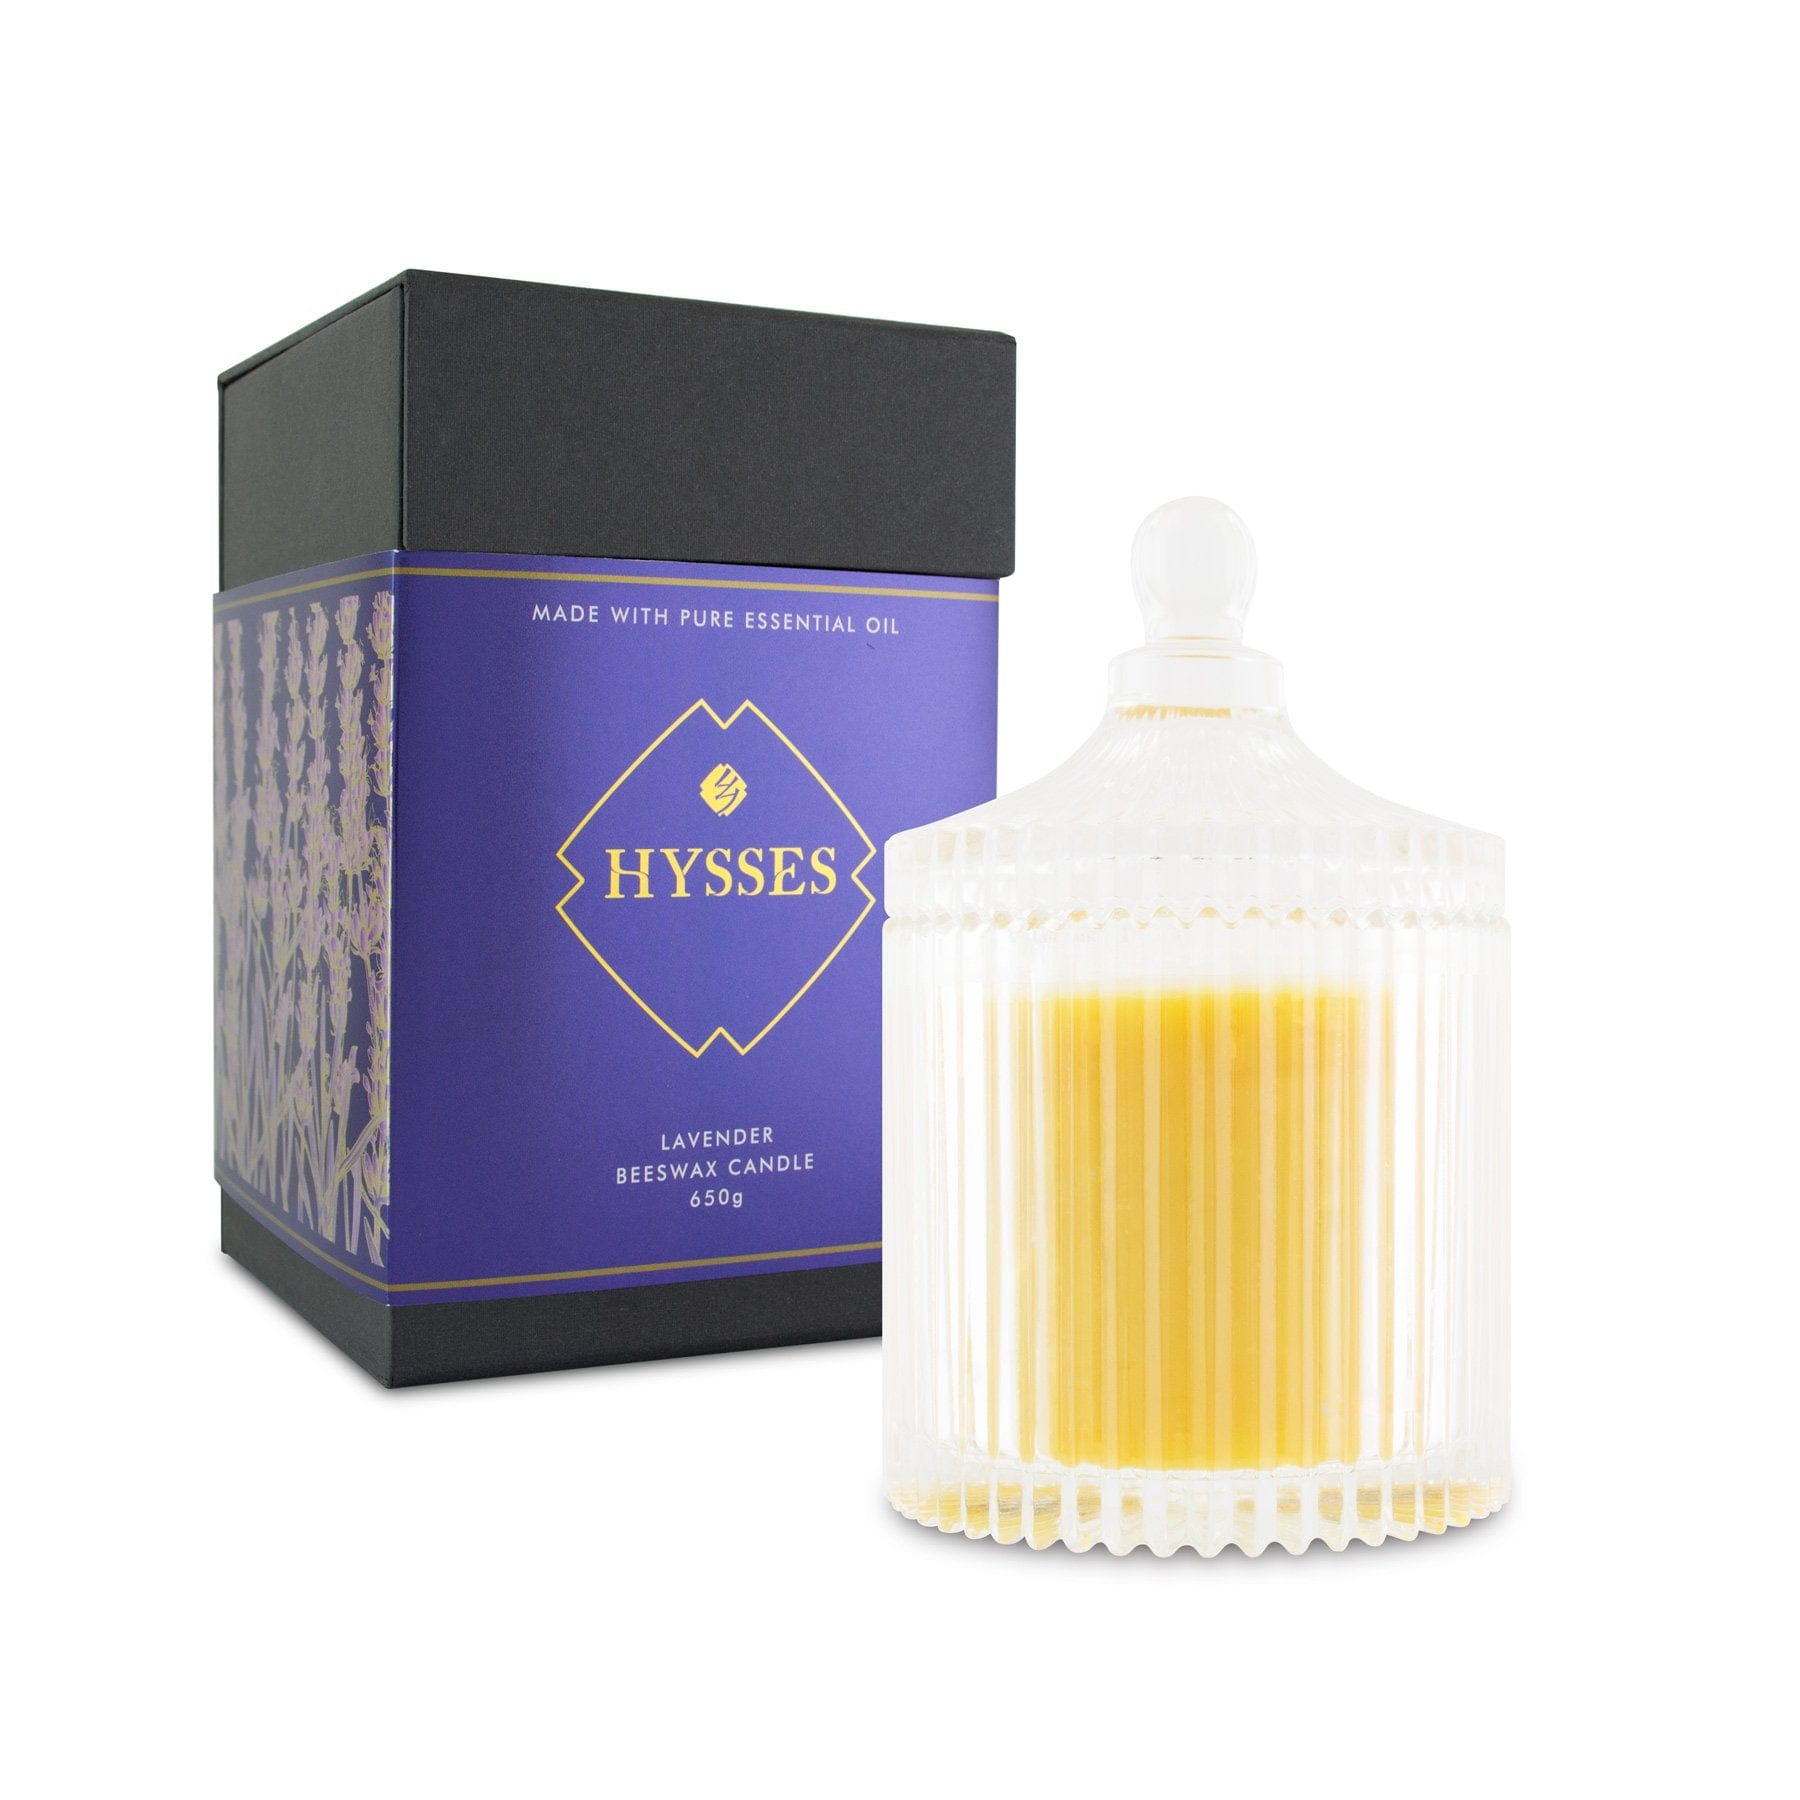 Beeswax Candle Lavender - Hysses Singapore